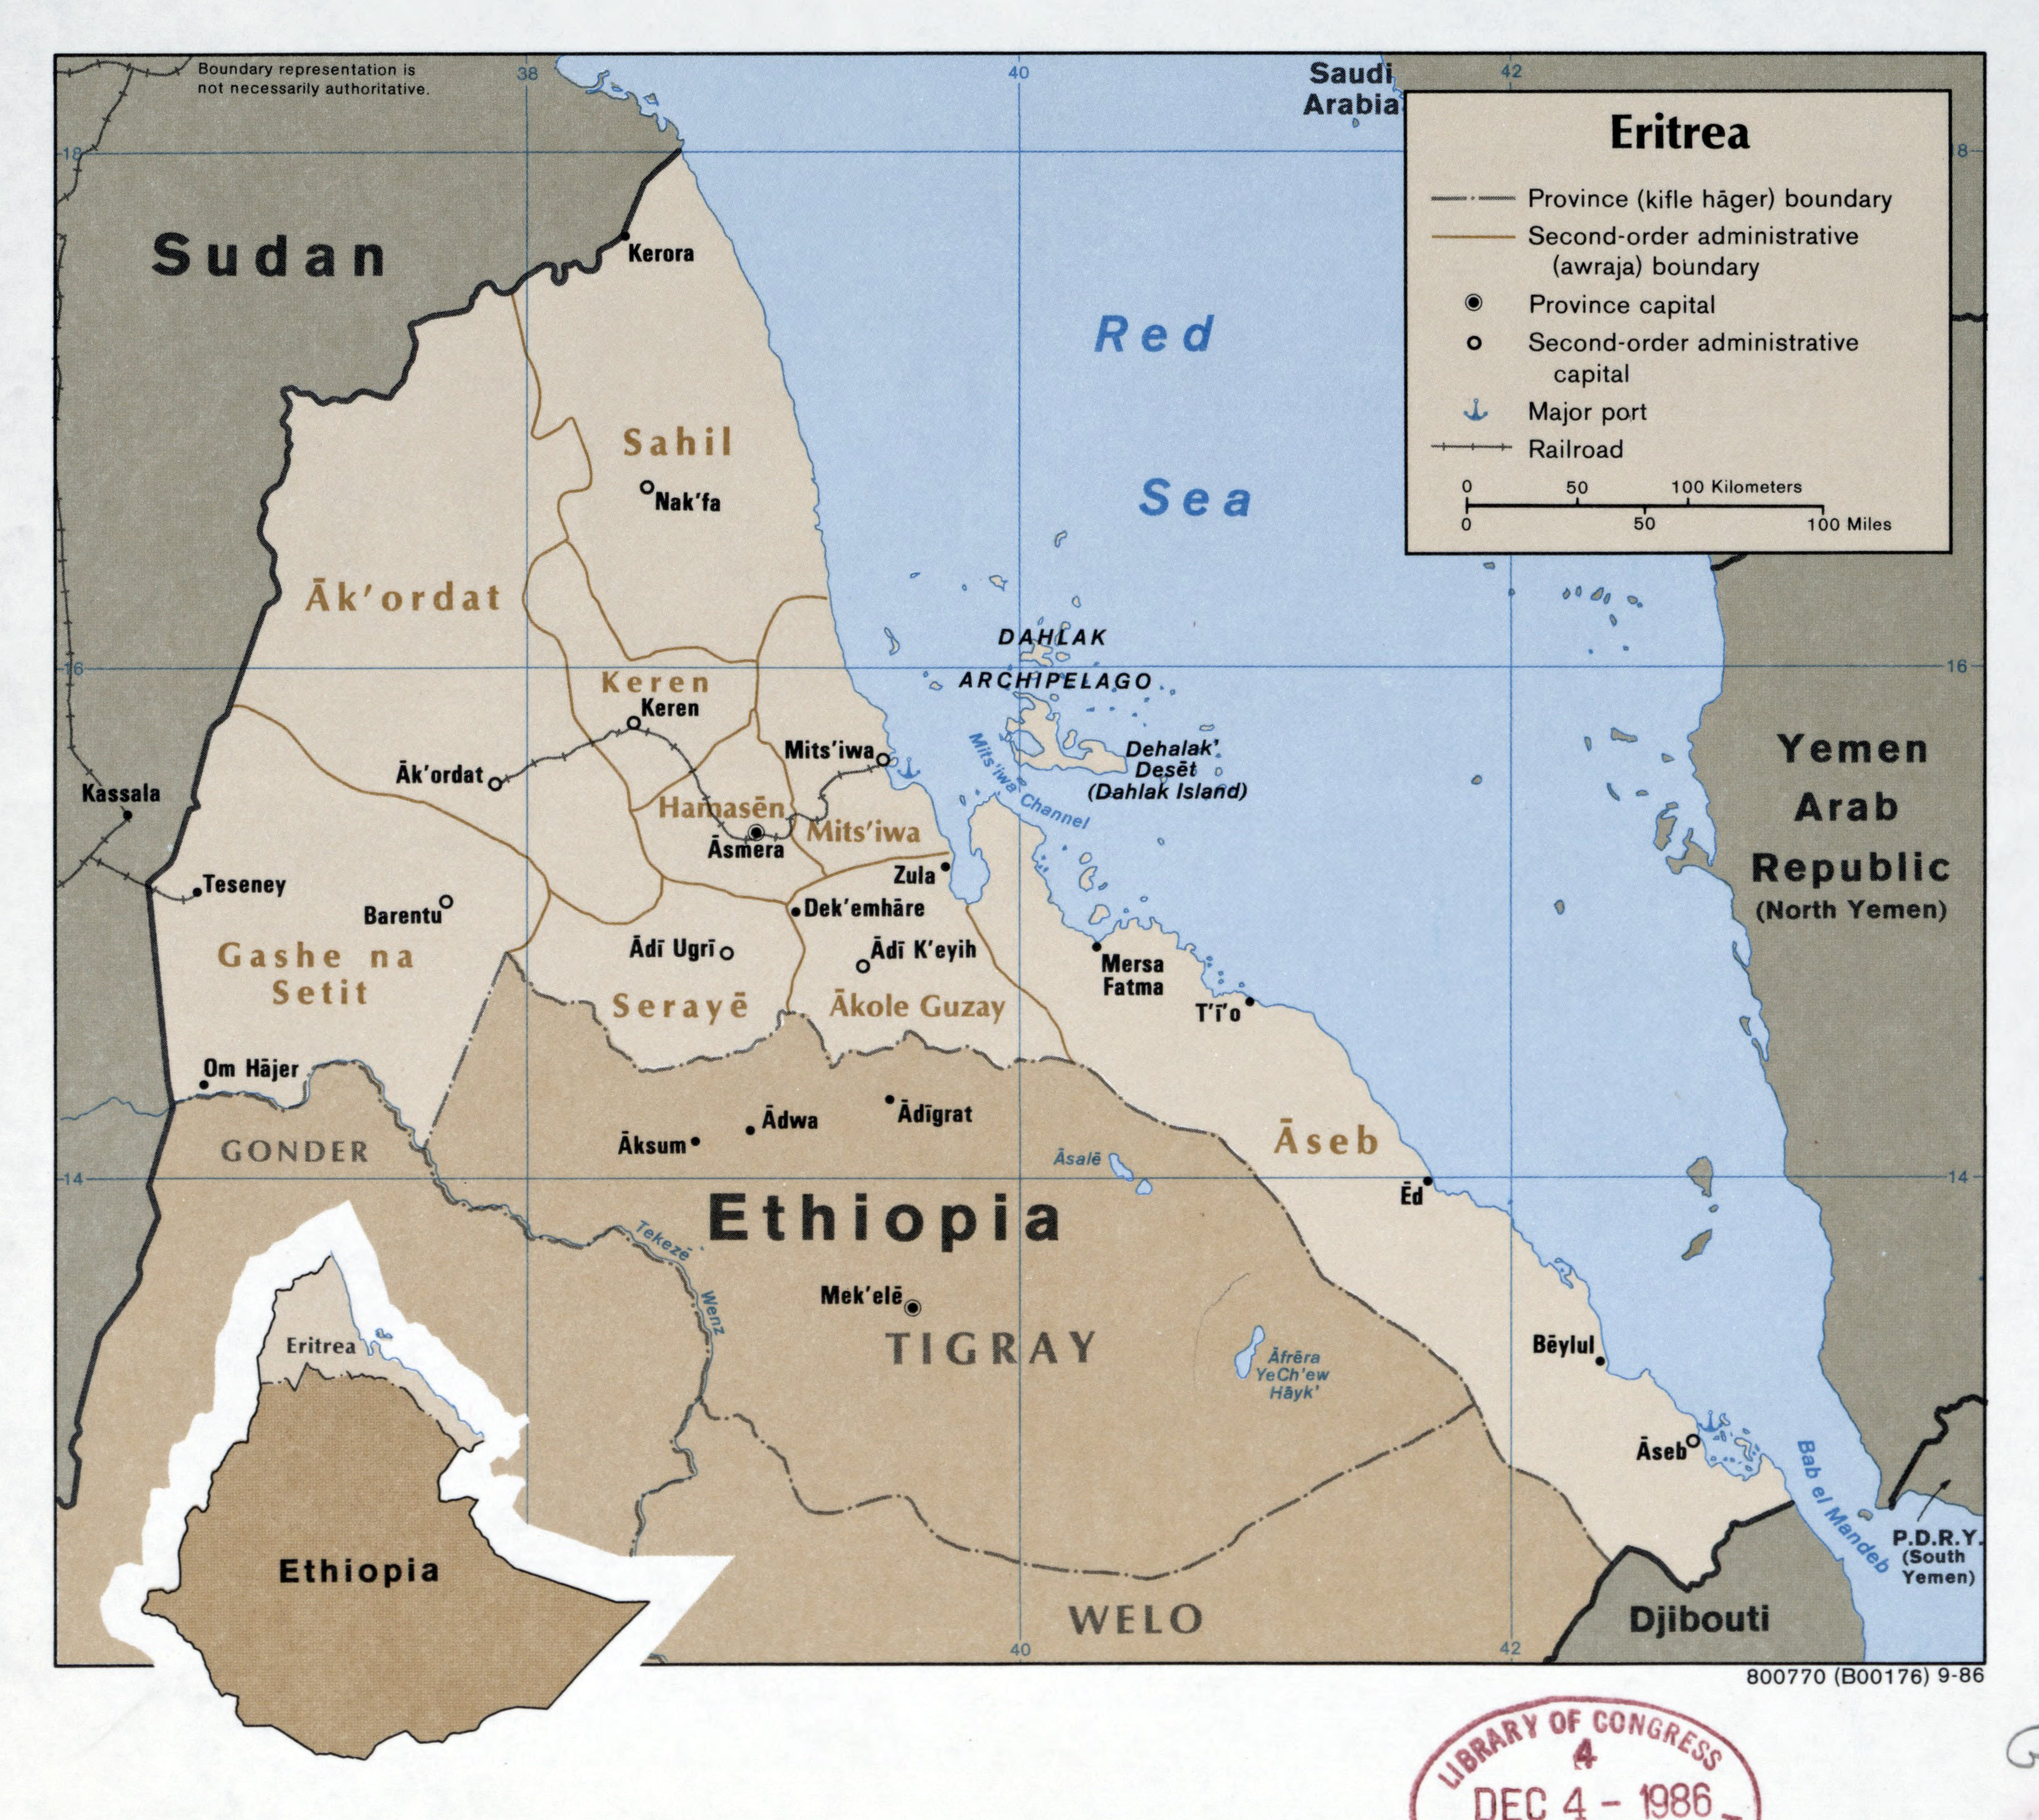 Large Scale Political Map Of Eritrea With Roads Railroads Ports And Major Cities 1986 